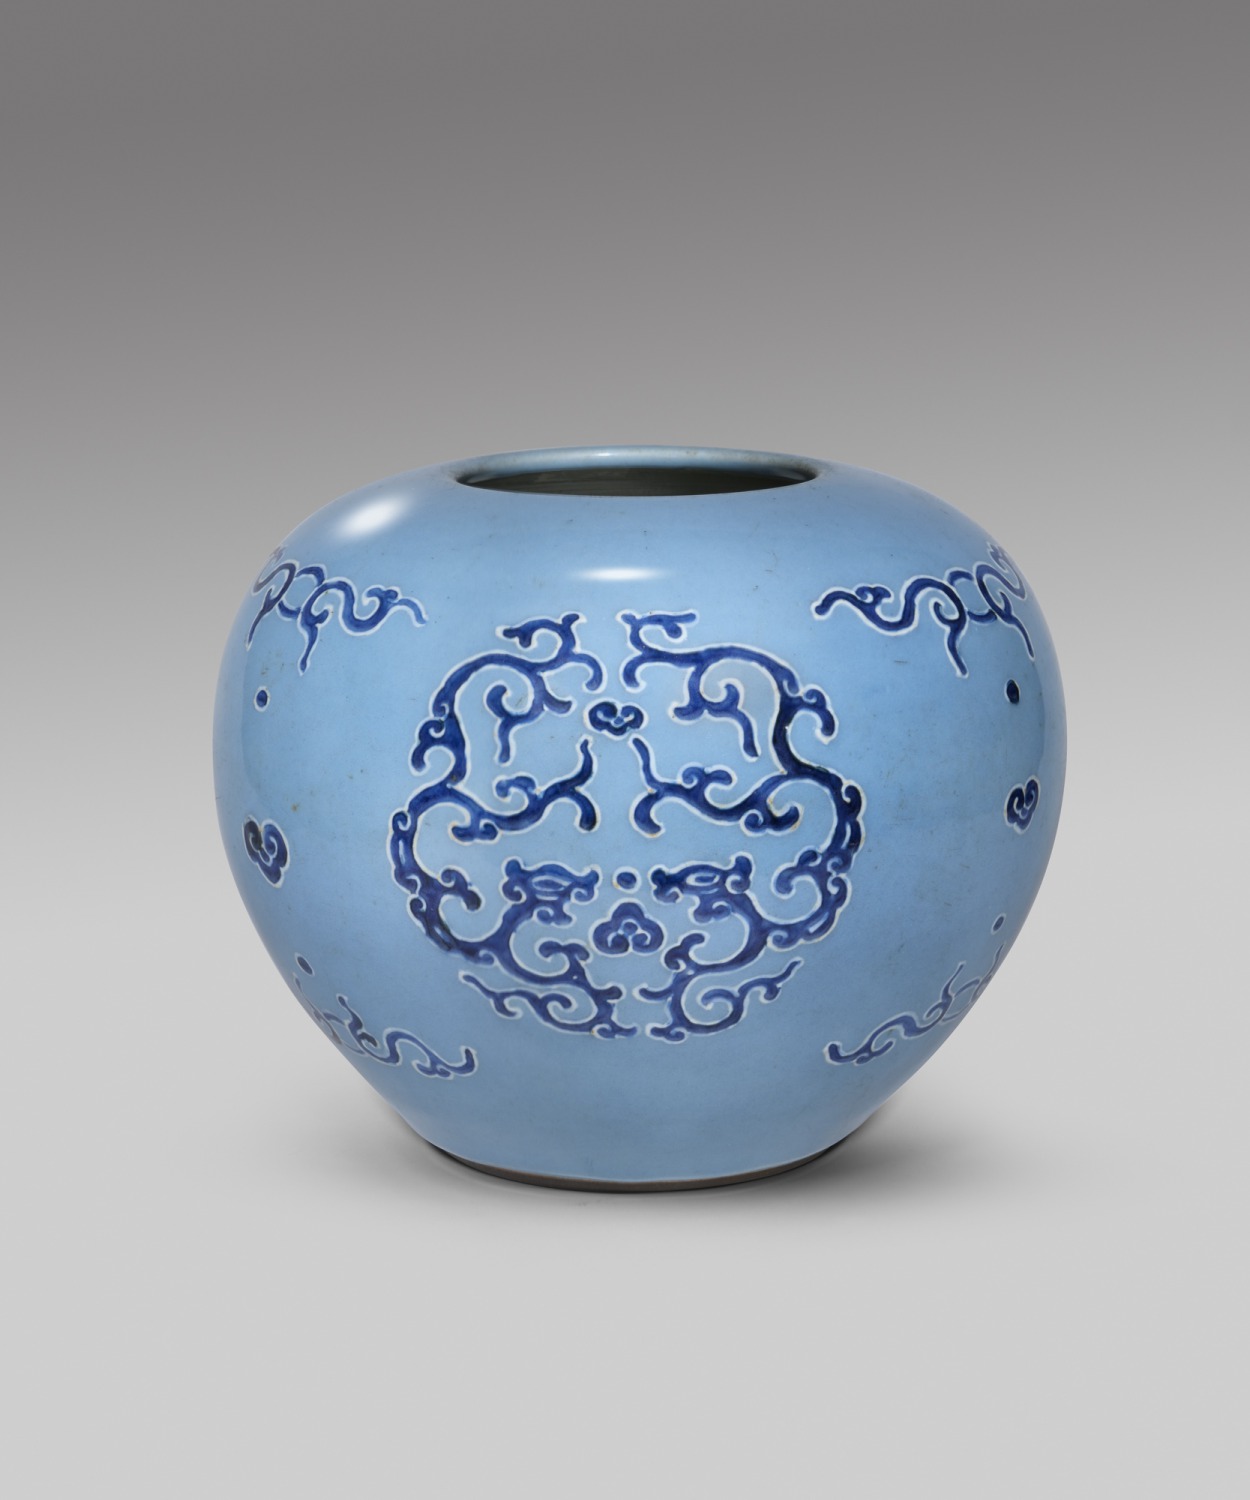 A sky blue jar with cobalt blue and white slip ‘dragon and cloud’ decoration (Qianlong mark and period, 1736-1795)